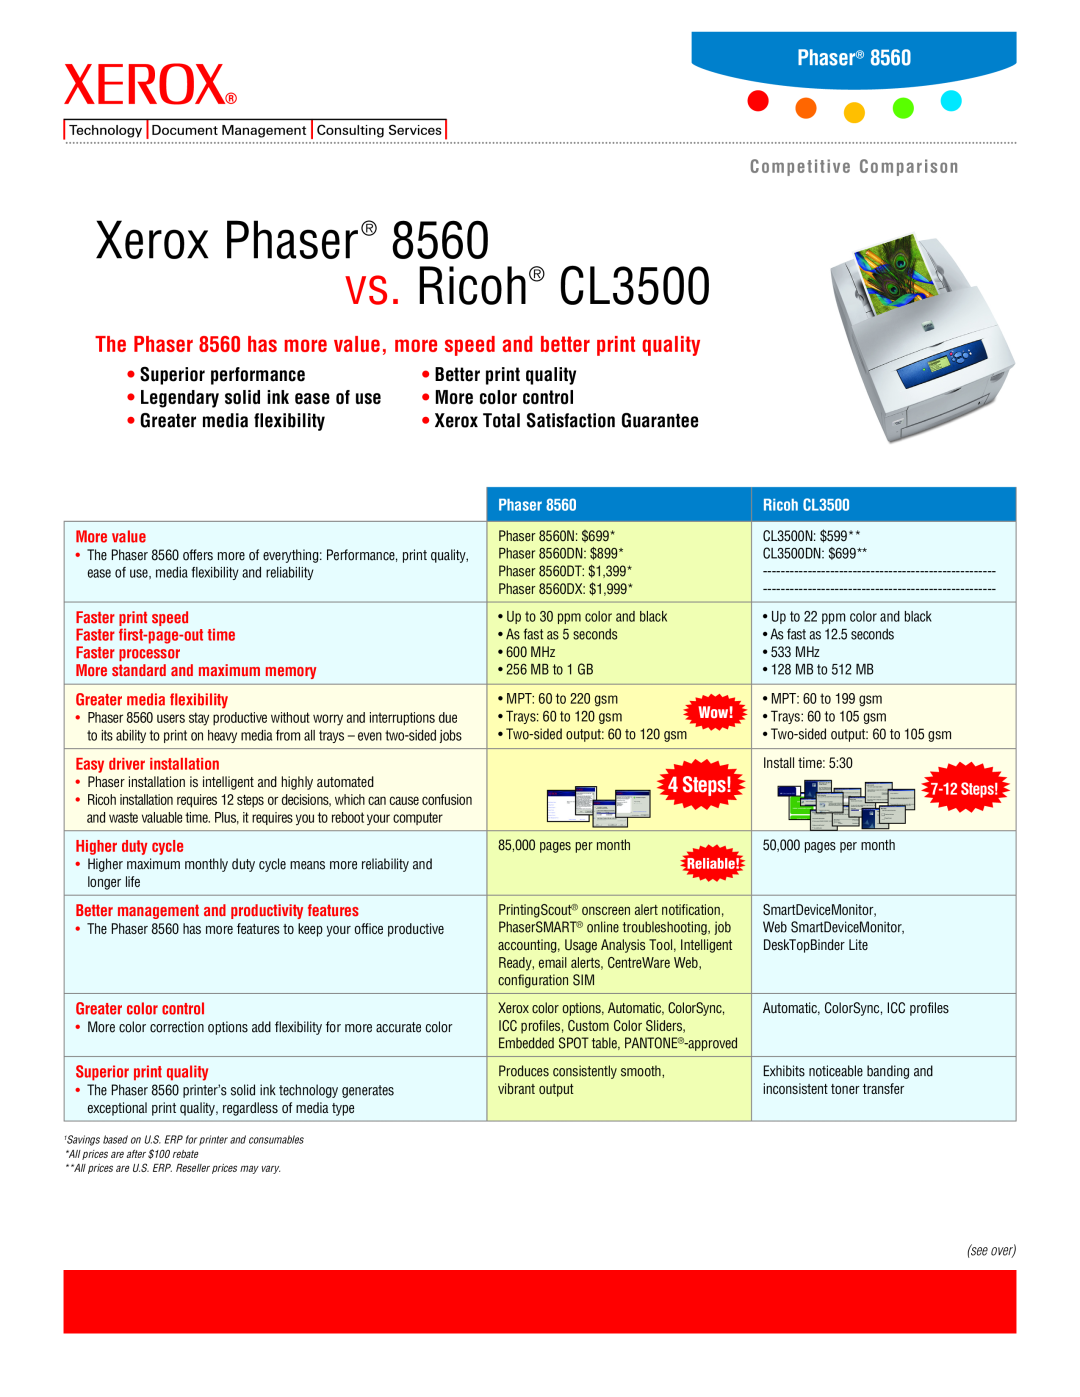 Xerox 8560 manual Competitive Comparison, vs. Ricoh CL3500, Xerox Phaser, Superior performance, 7-12Steps 